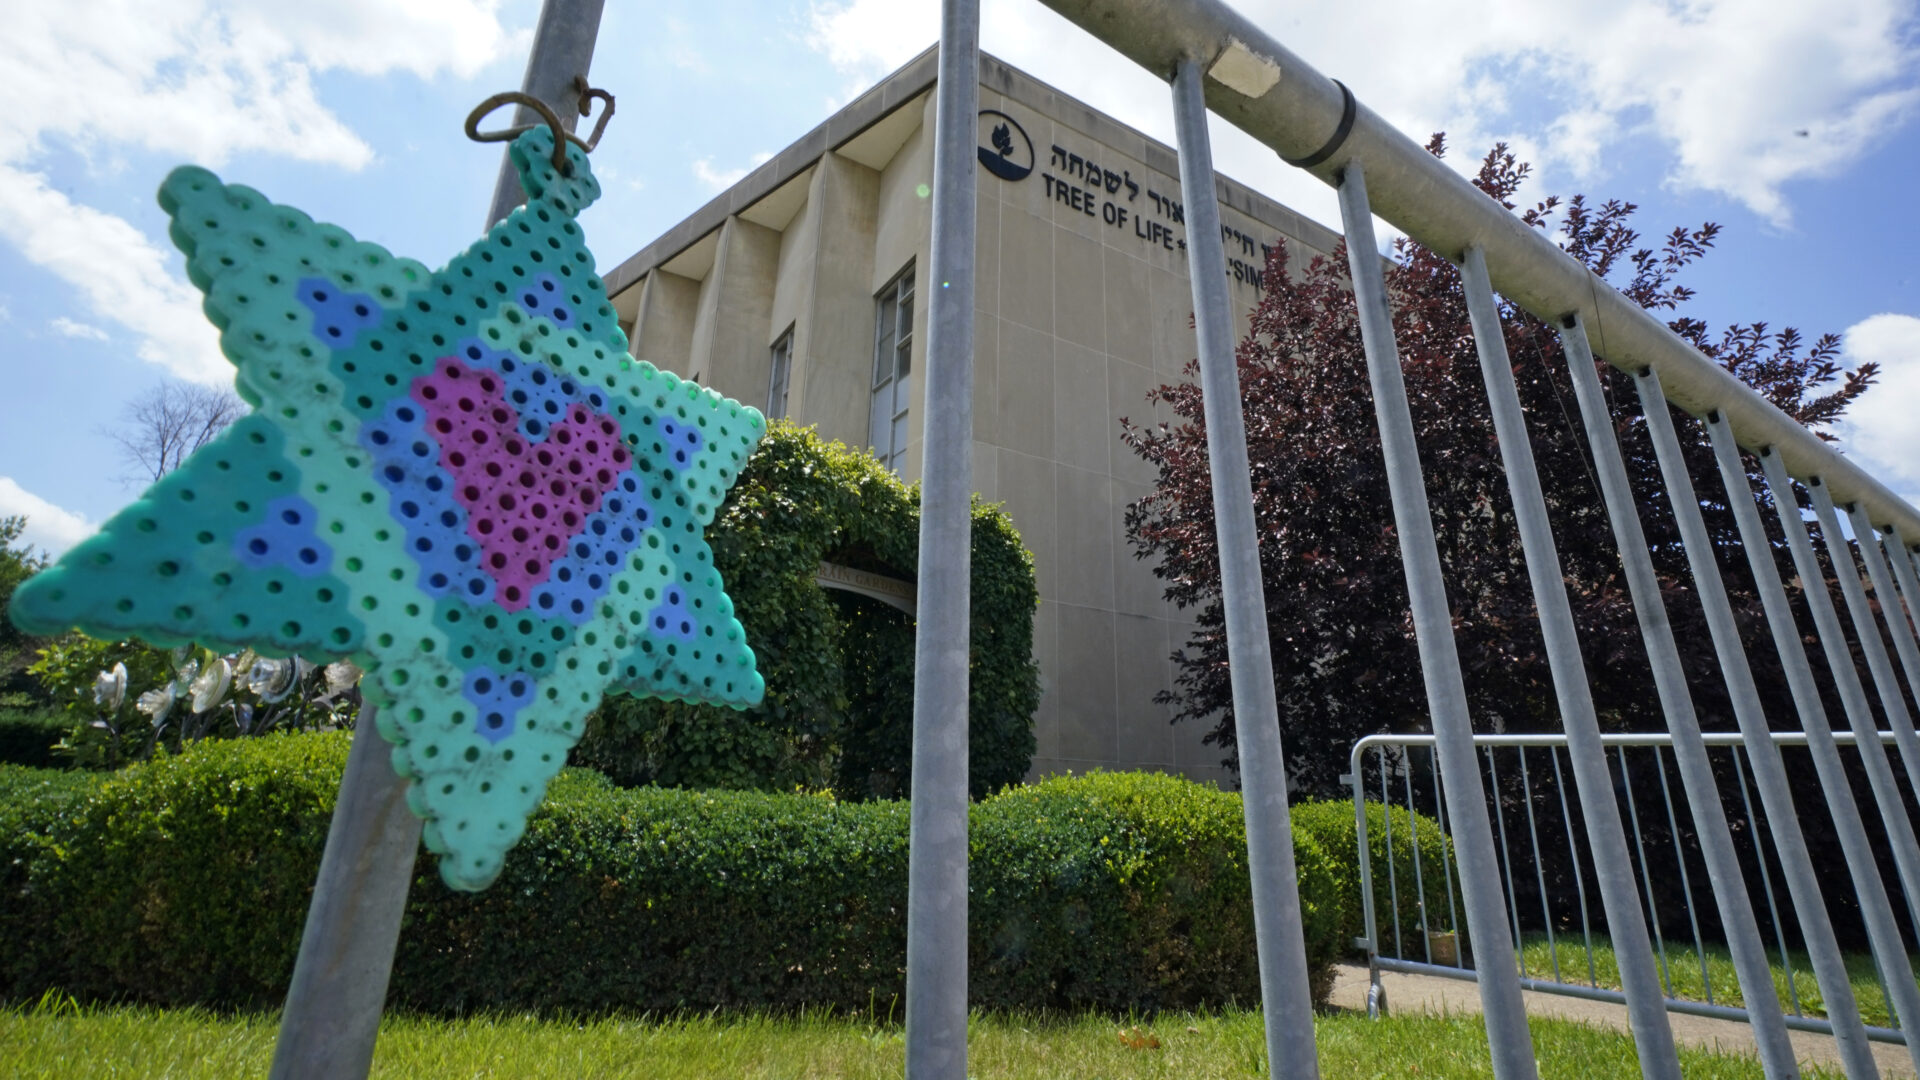 A Star of David hangs from a fence outside the dormant landmark Tree of Life synagogue in Pittsburgh's Squirrel Hill neighborhood on Thursday, July 13, 2023, the day a federal jury announced they had found Robert Bowers, who in 2018 killed 11 people at the synagogue, eligible for the death penalty. 